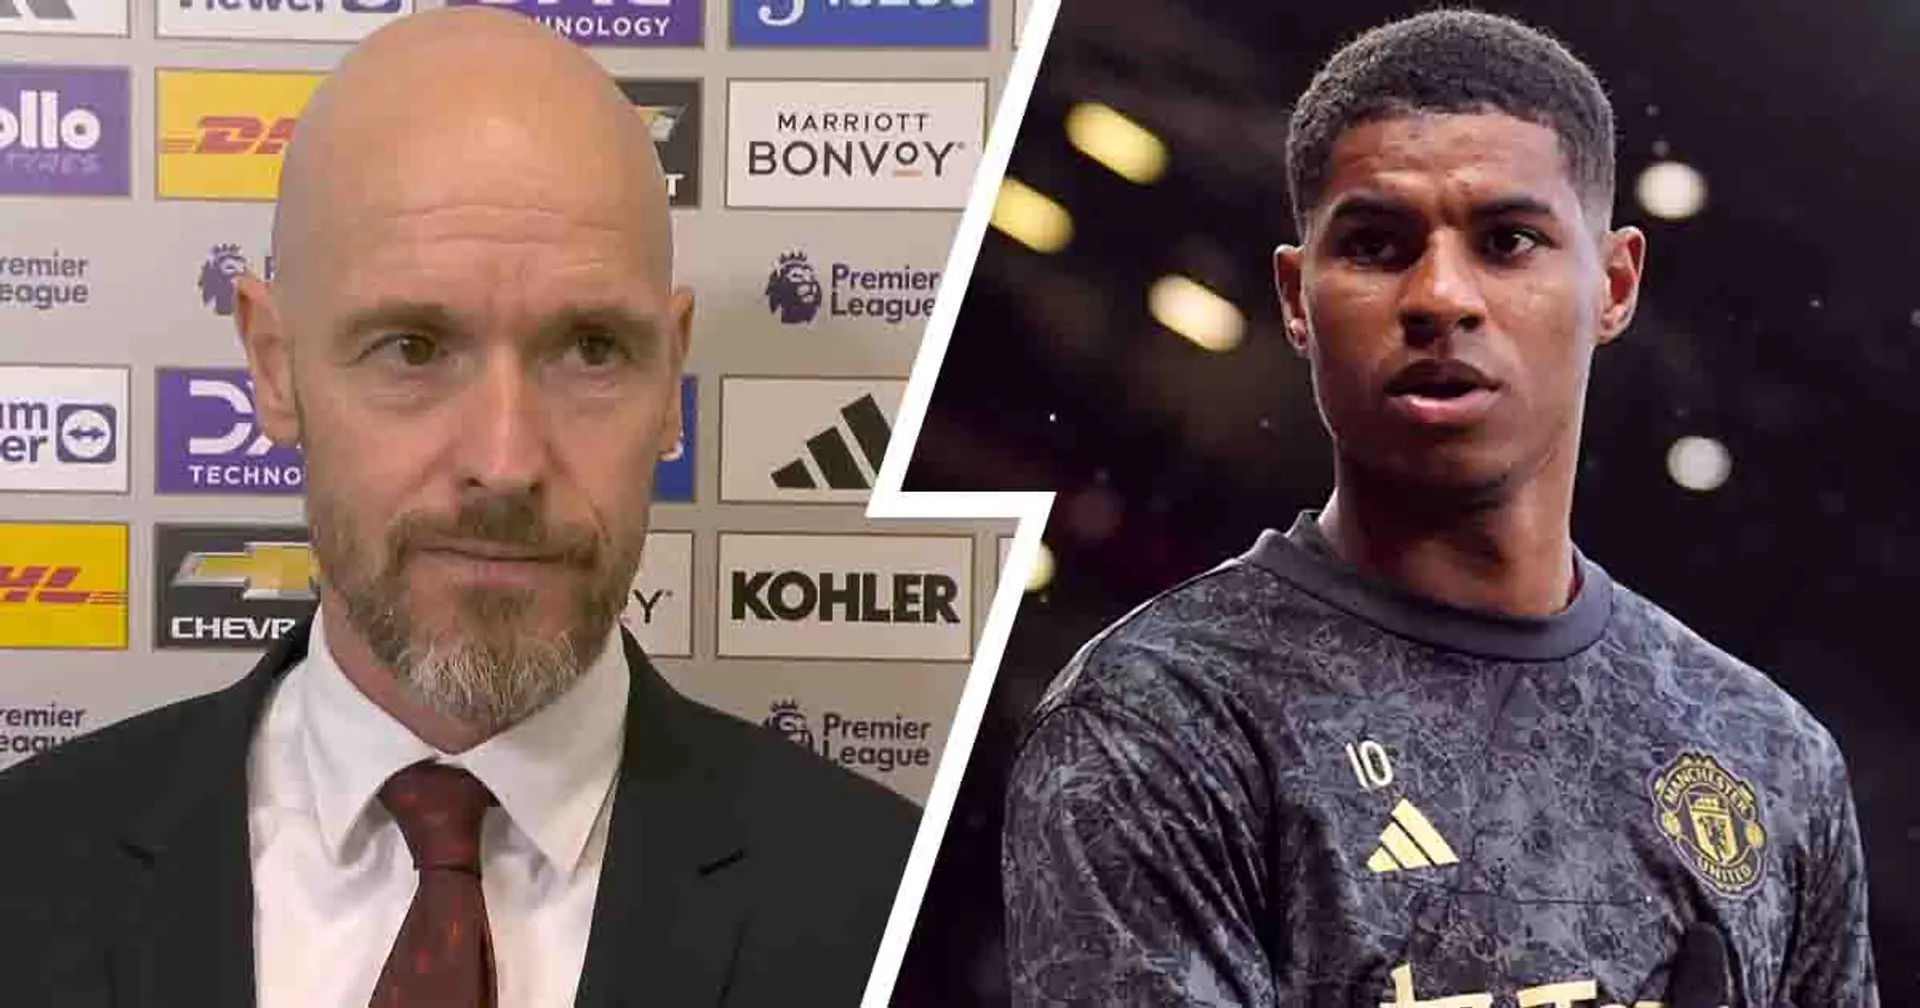 'I saw yesterday': Ten Hag reacts to Rashford's controversial moment with Man United fan